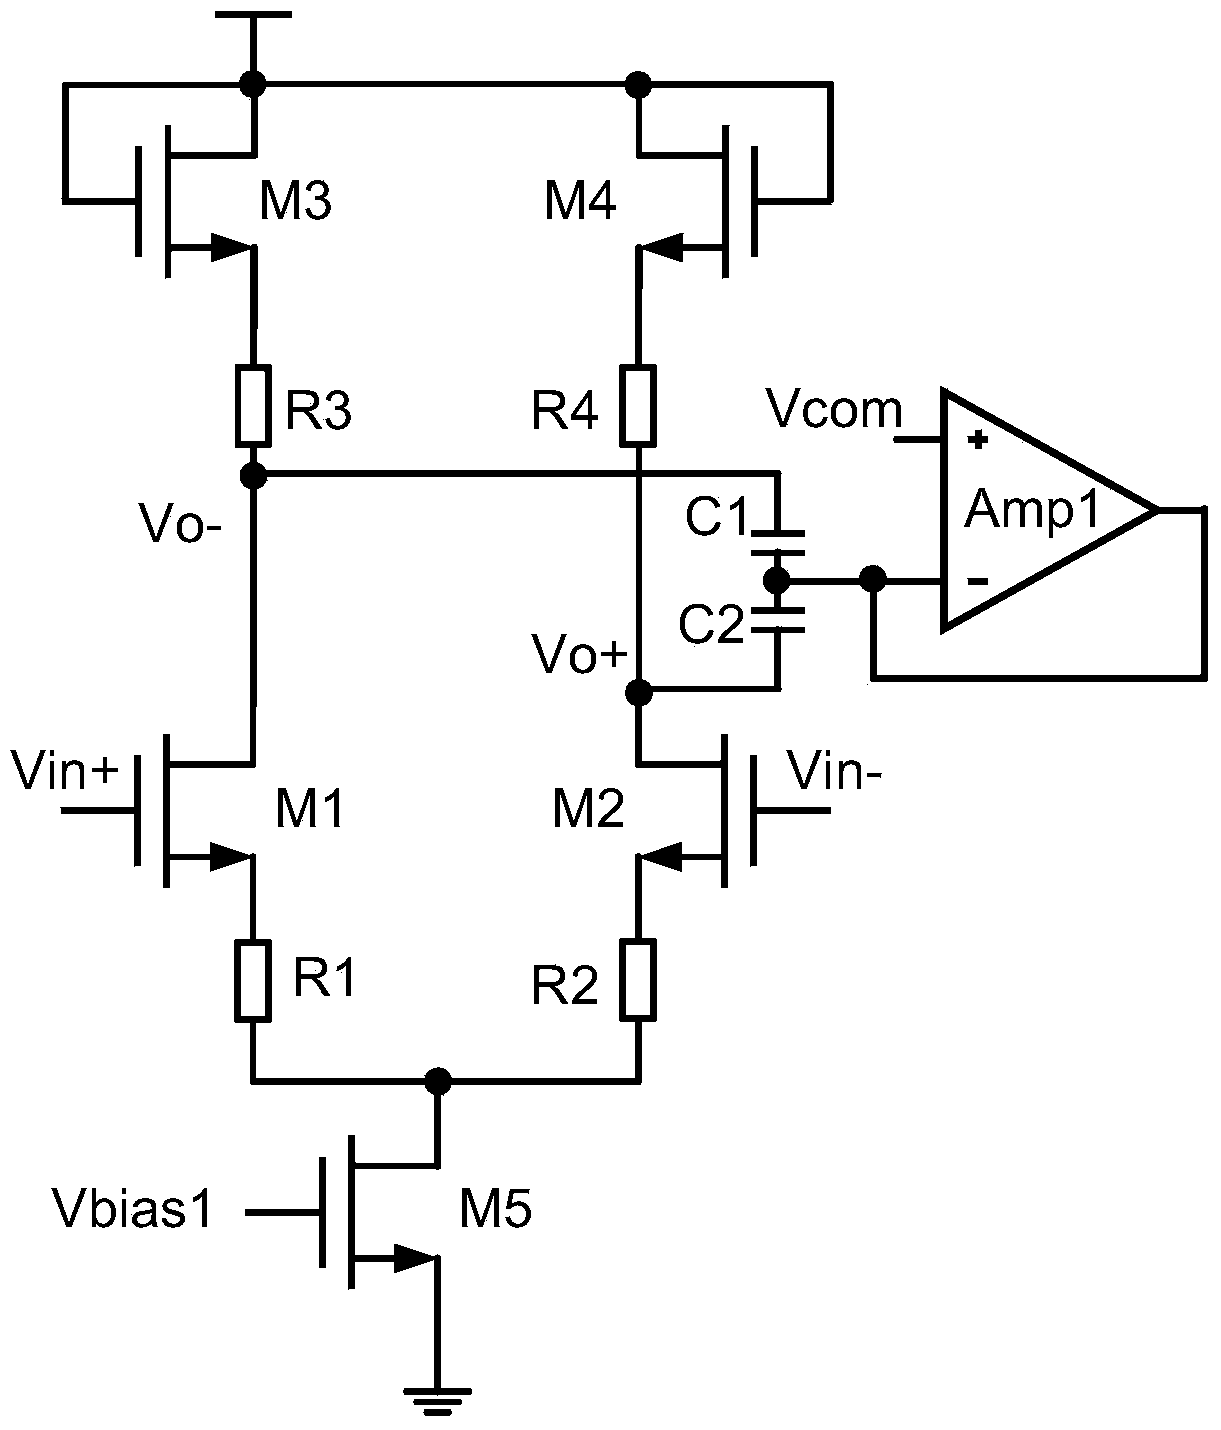 Open loop amplifier with stable output common-mode voltage